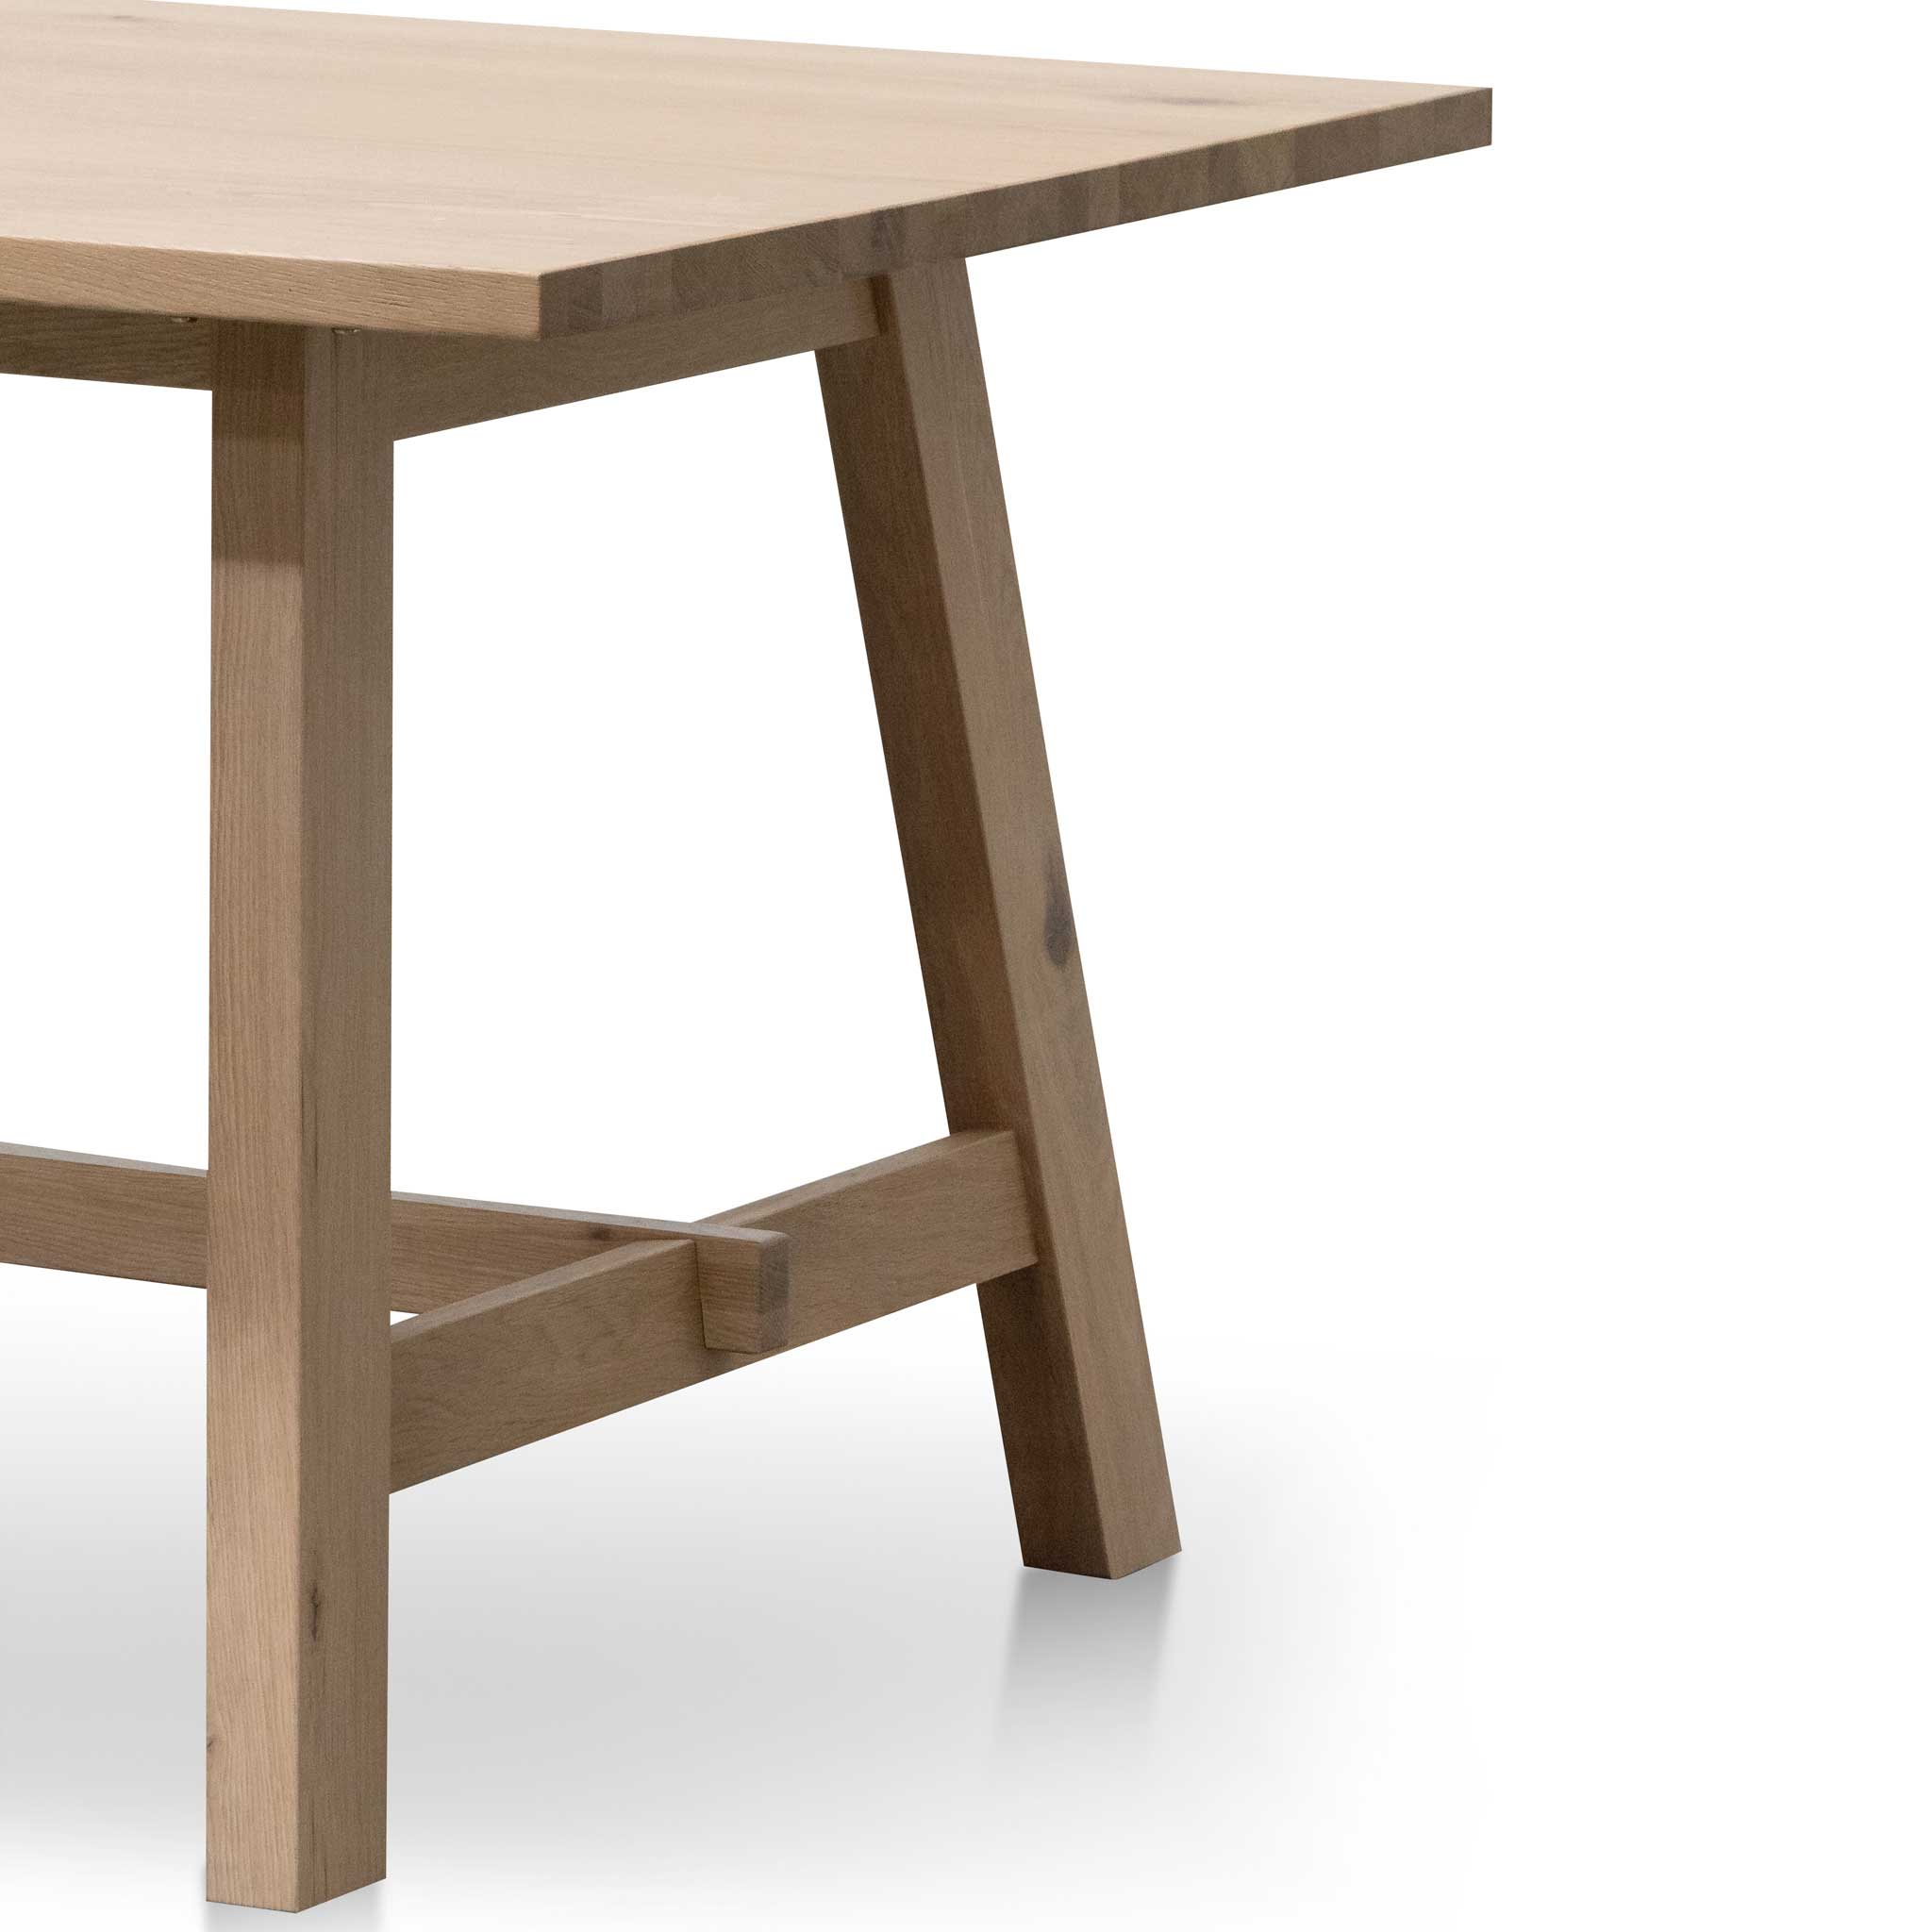 Quail 2.2m Wooden Dining Table - Washed Natural - Dining Tables